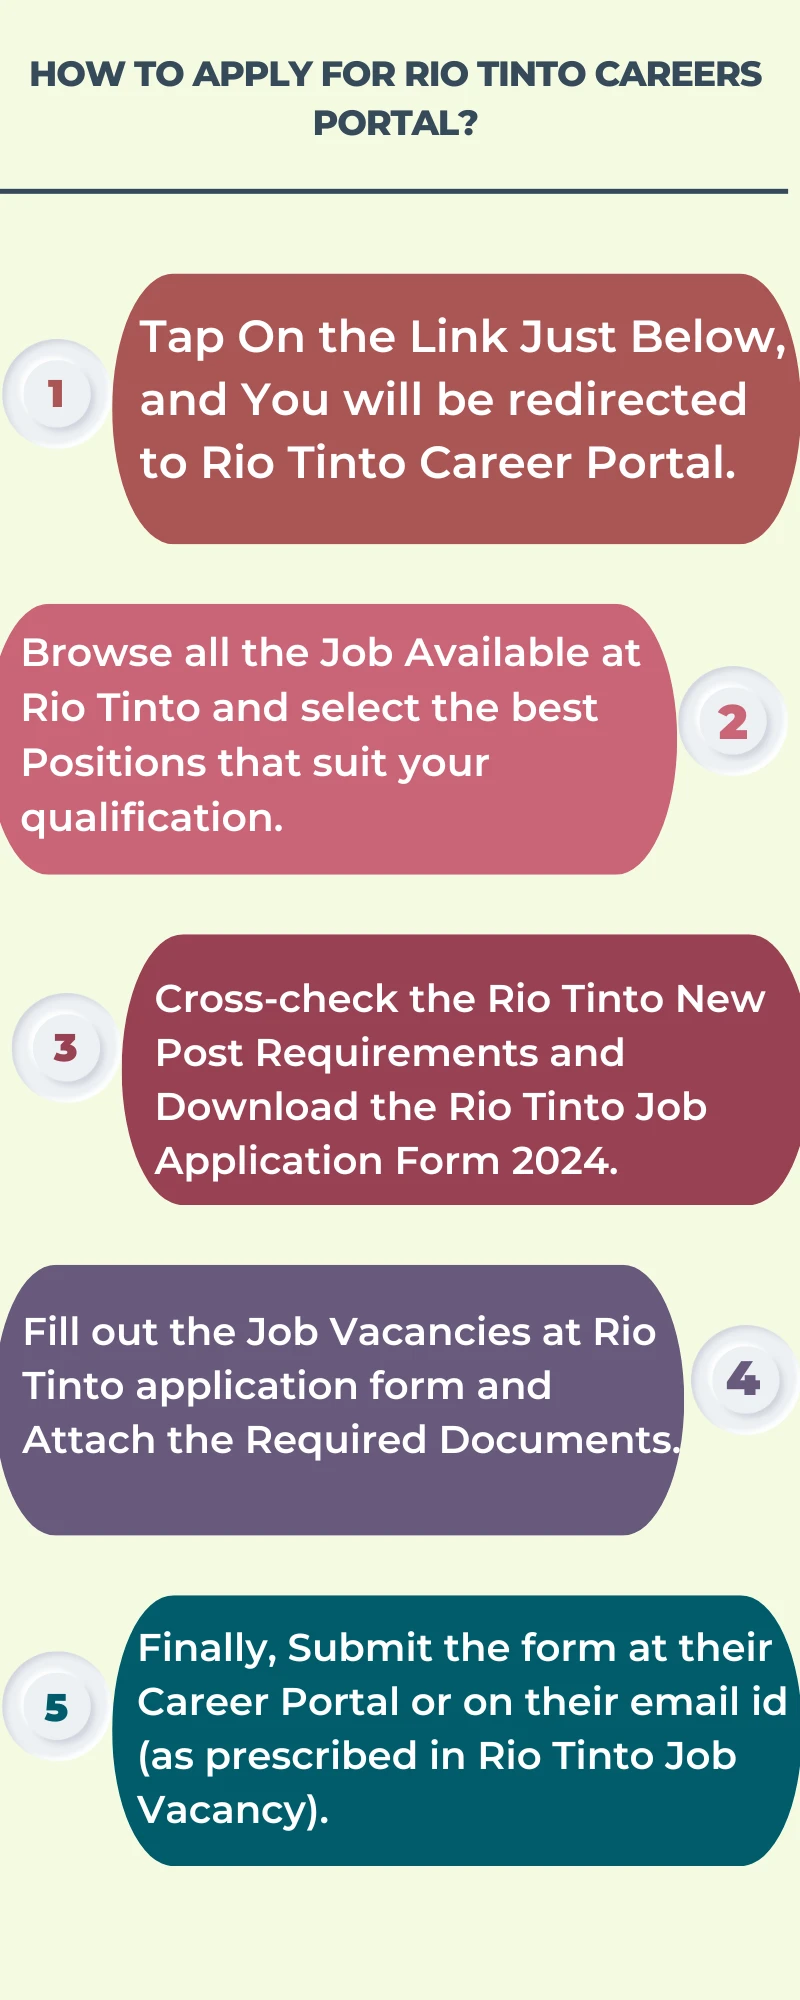 How To Apply for Rio Tinto Careers Portal?